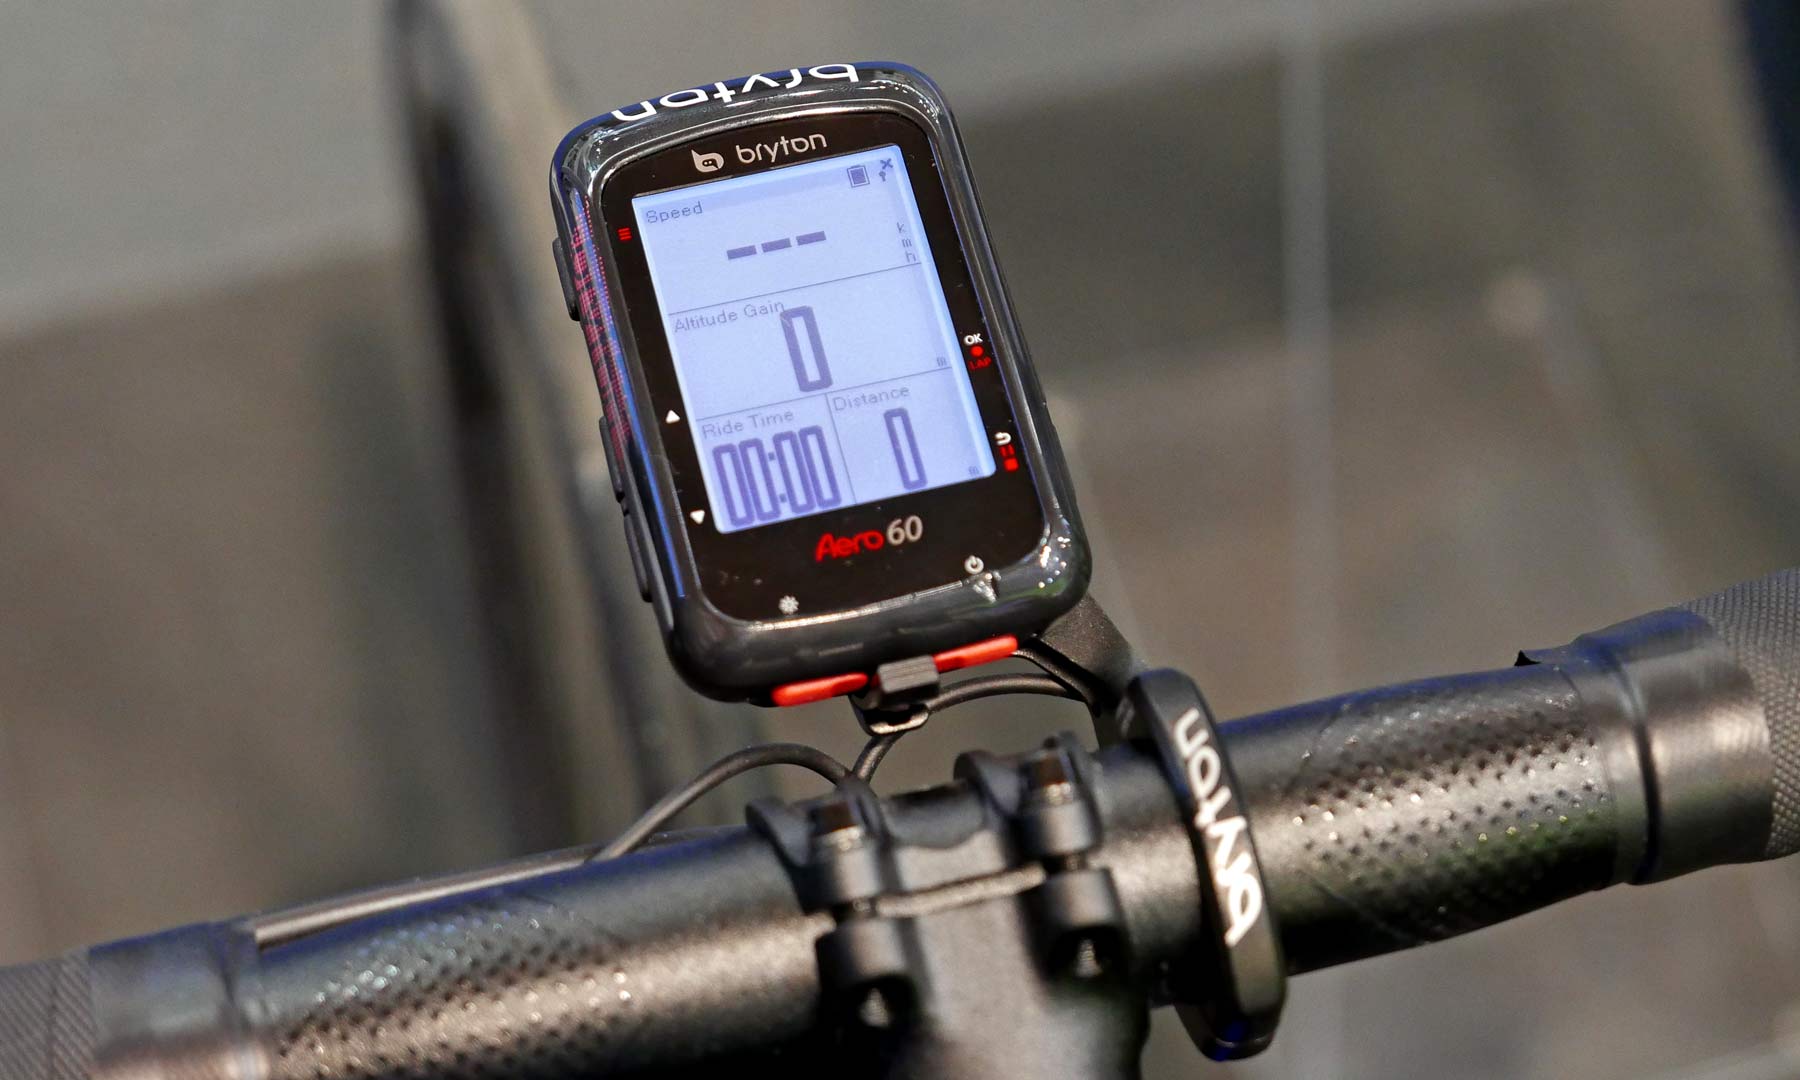 Bryton Rider Aero 60E GPS Cycle Computer ANT 78 functions and exceptional APP 